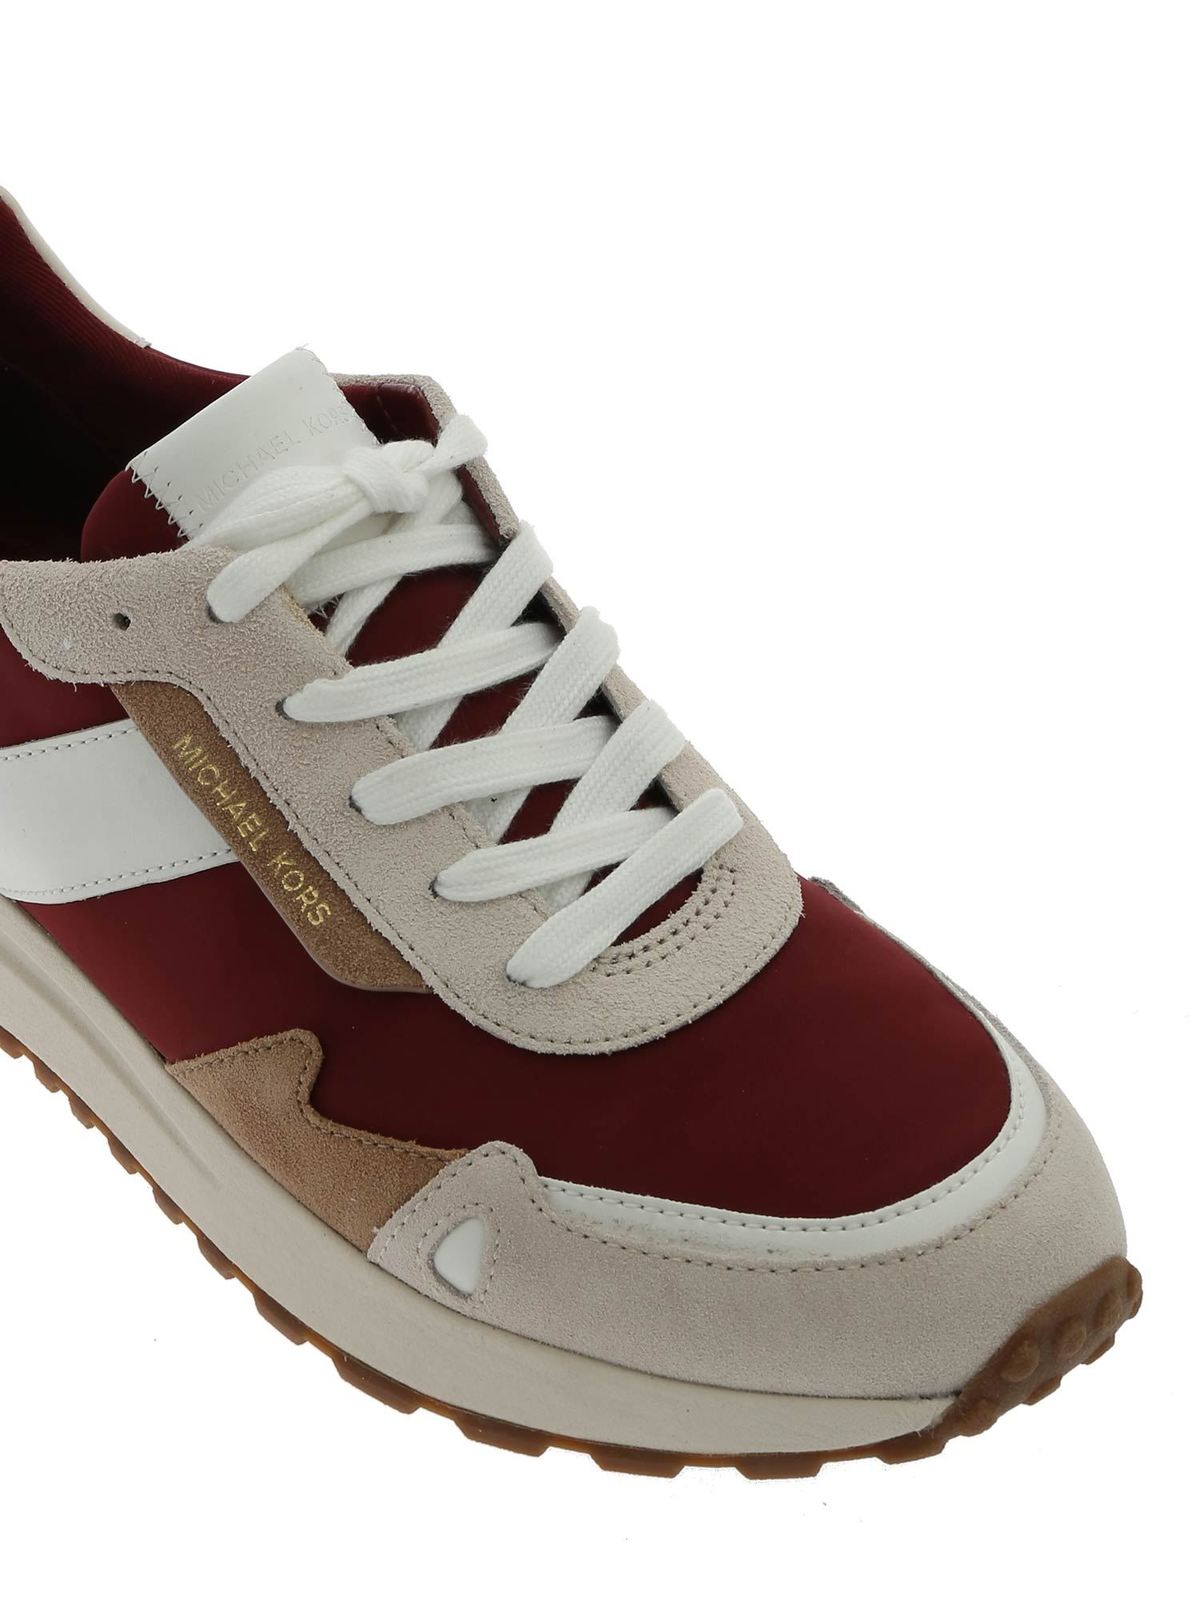 Loose difference Stereotype Trainers Michael Kors - Monroe Trainer sneakers in burgundy and ecrù -  43F9MOFS7DBRANDY